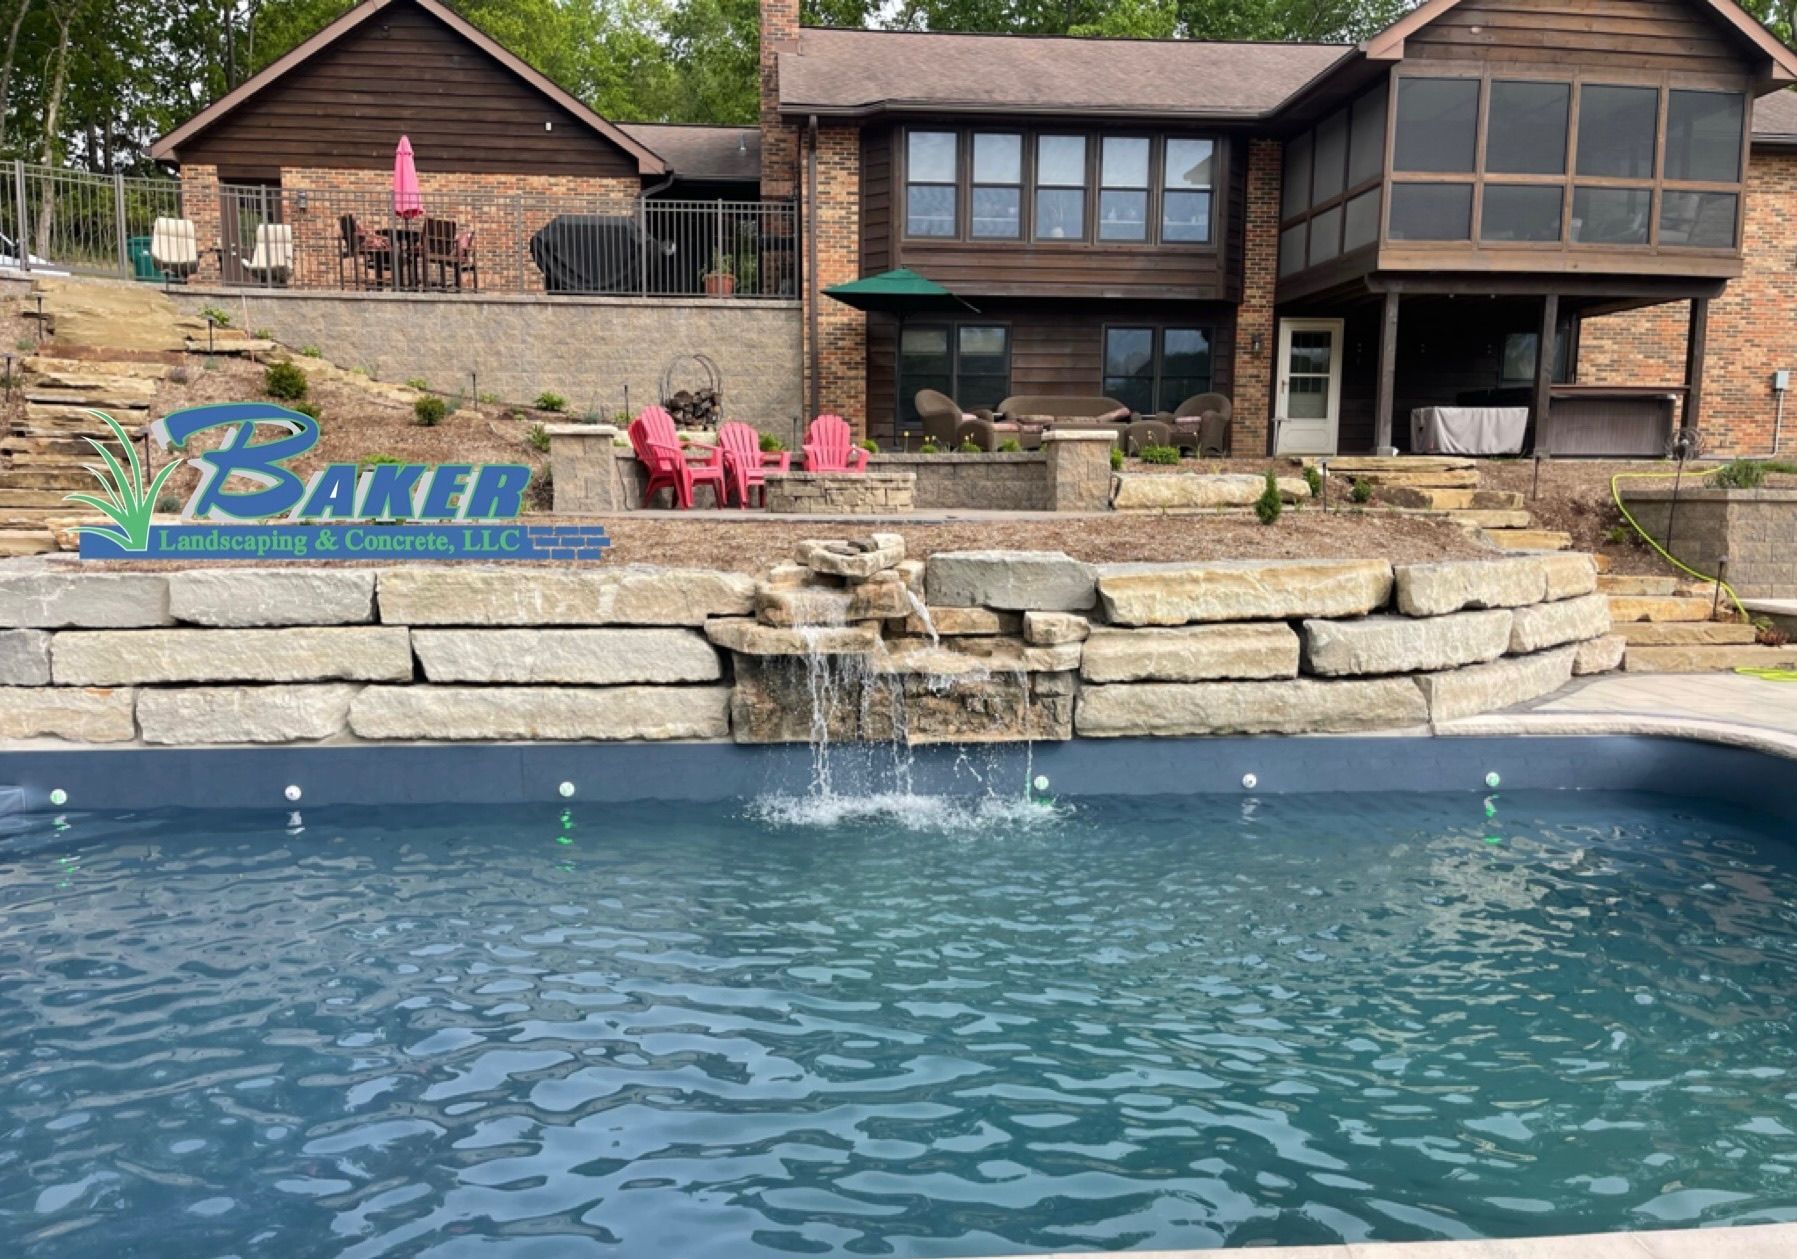 House Waterfall and Pool - St. Louis, MO - Baker Landscaping & Concrete, LLC